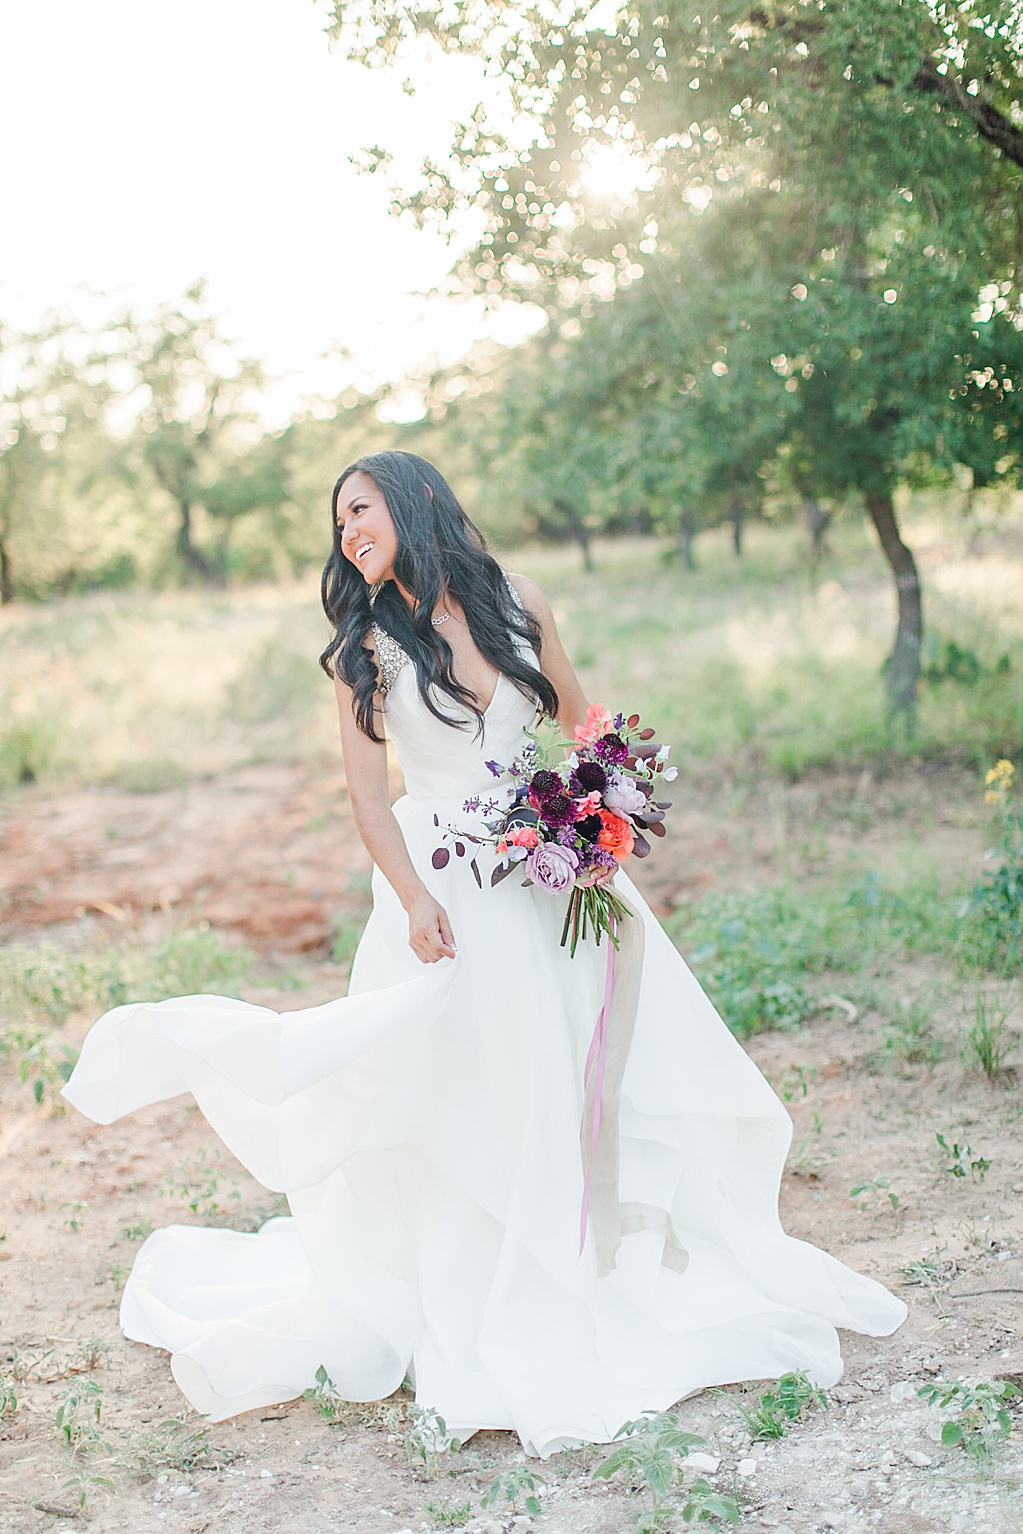 the barn at swallows eve wedding venue in fredericksburg texas photo inspiration featured on Grey Likes Weddings 0017